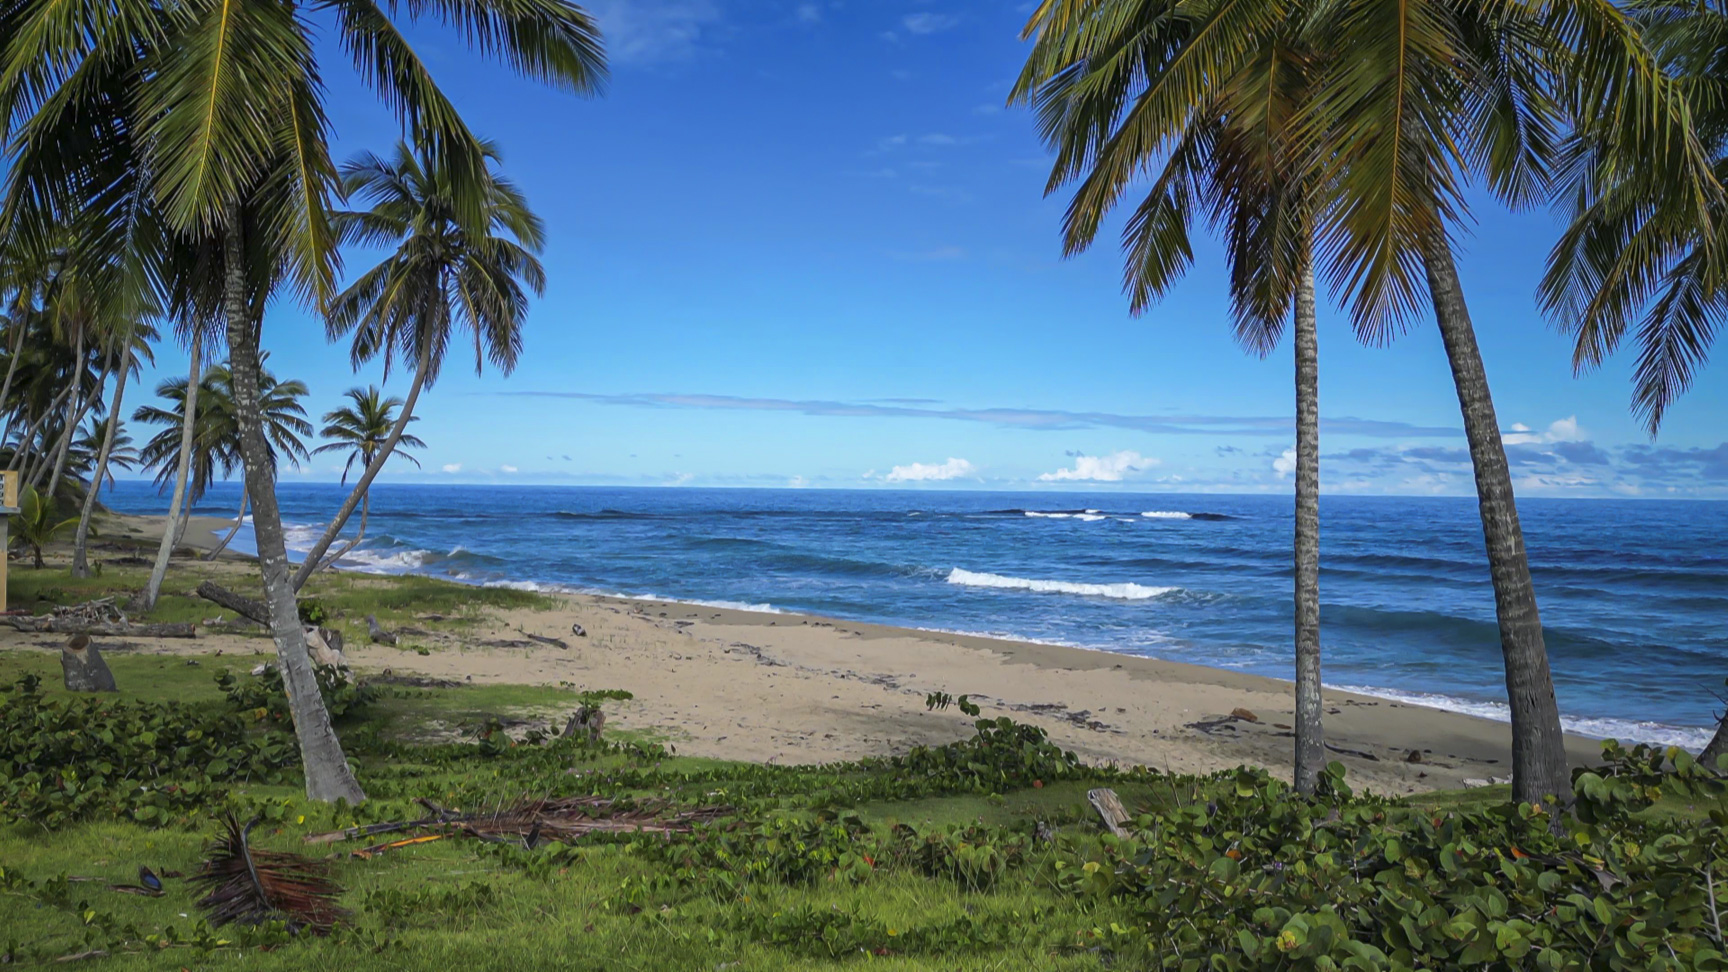 View of Encuentro Beach and ocean